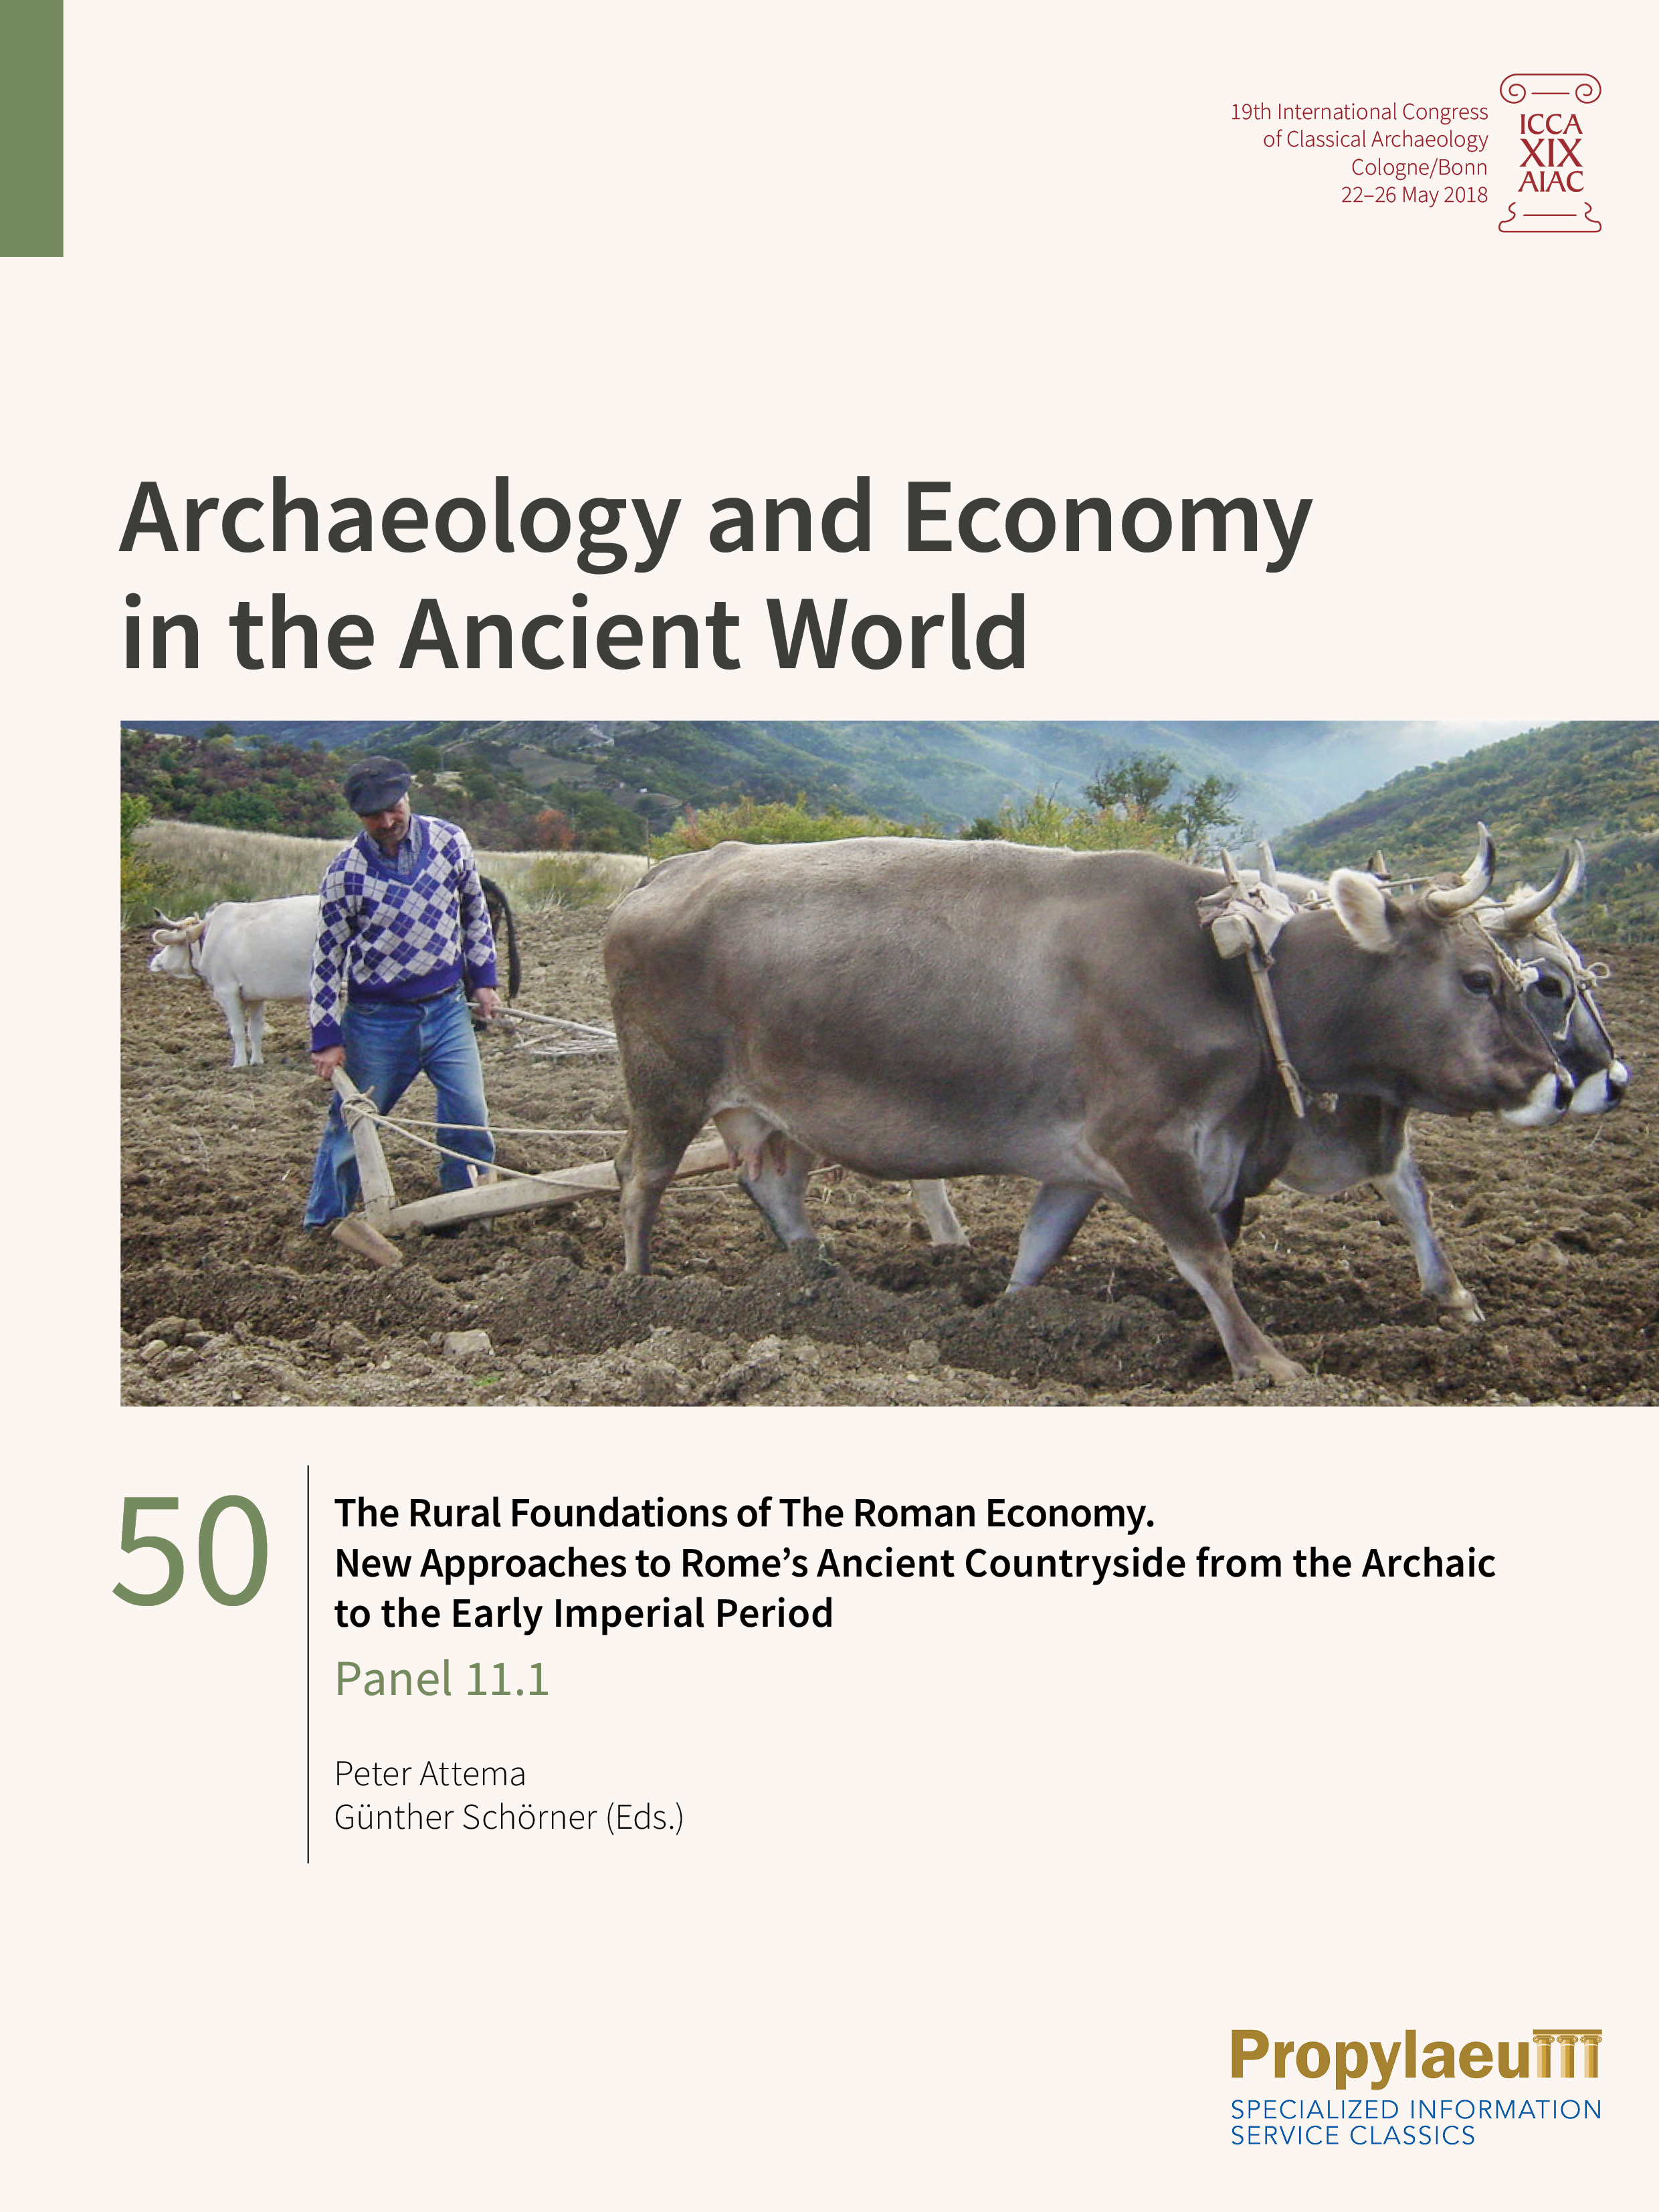 Cover: The Rural Foundations of The Roman Economy. New Approaches to Rome’s Ancient Countryside from the Archaic to the Early Imperial Period